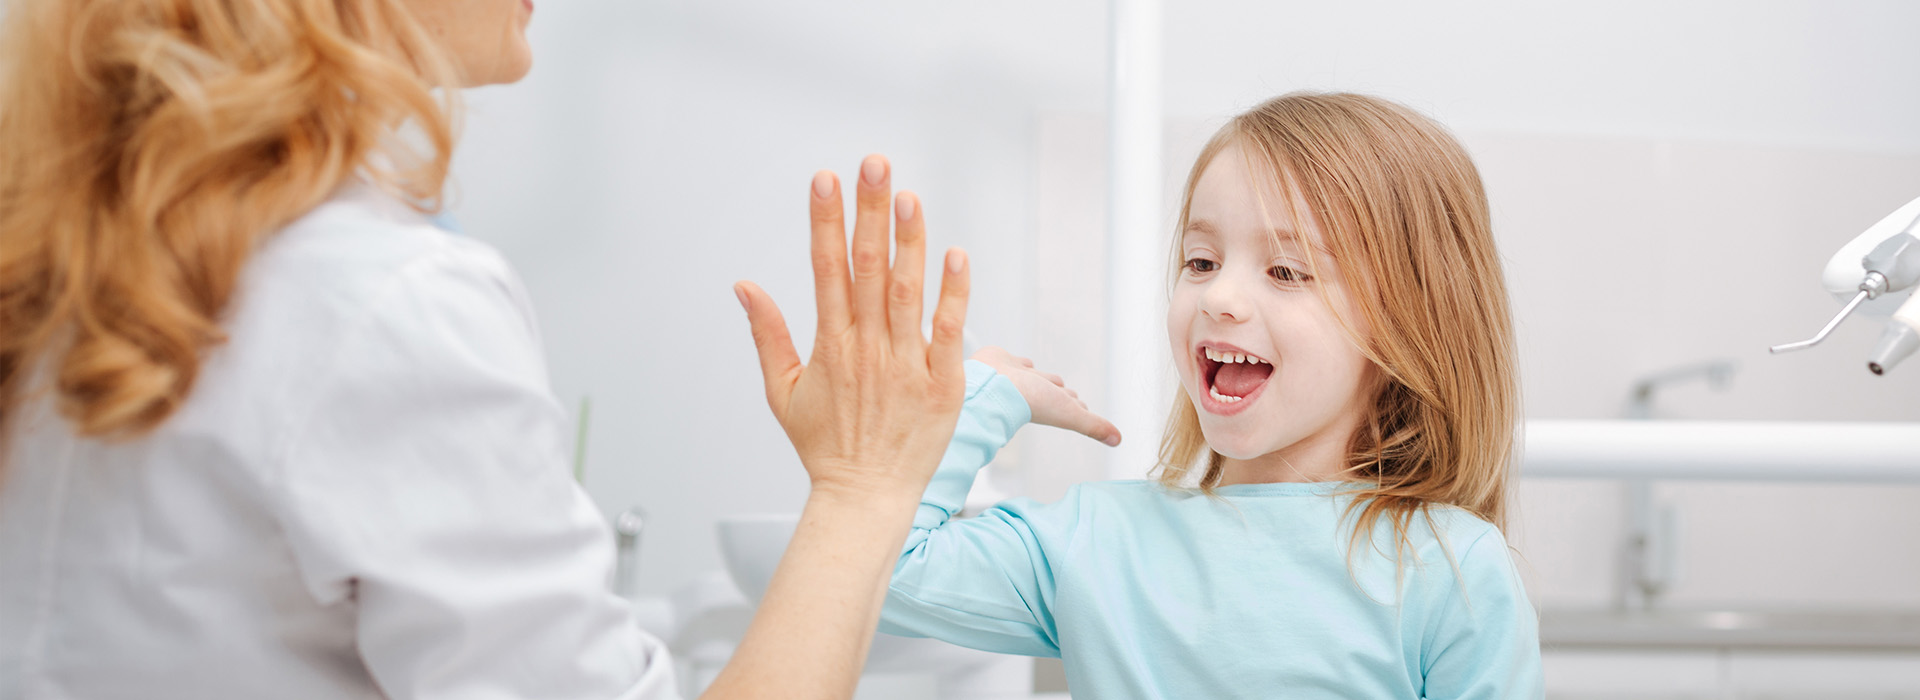 A woman and a young girl are seen in the image, with the woman holding up her hand towards the child. The girl appears to be smiling or laughing, while the woman is looking at her with a smile on her face. They seem to be in an indoor setting, possibly a bathroom, as suggested by the presence of a sink and mirror in the background.